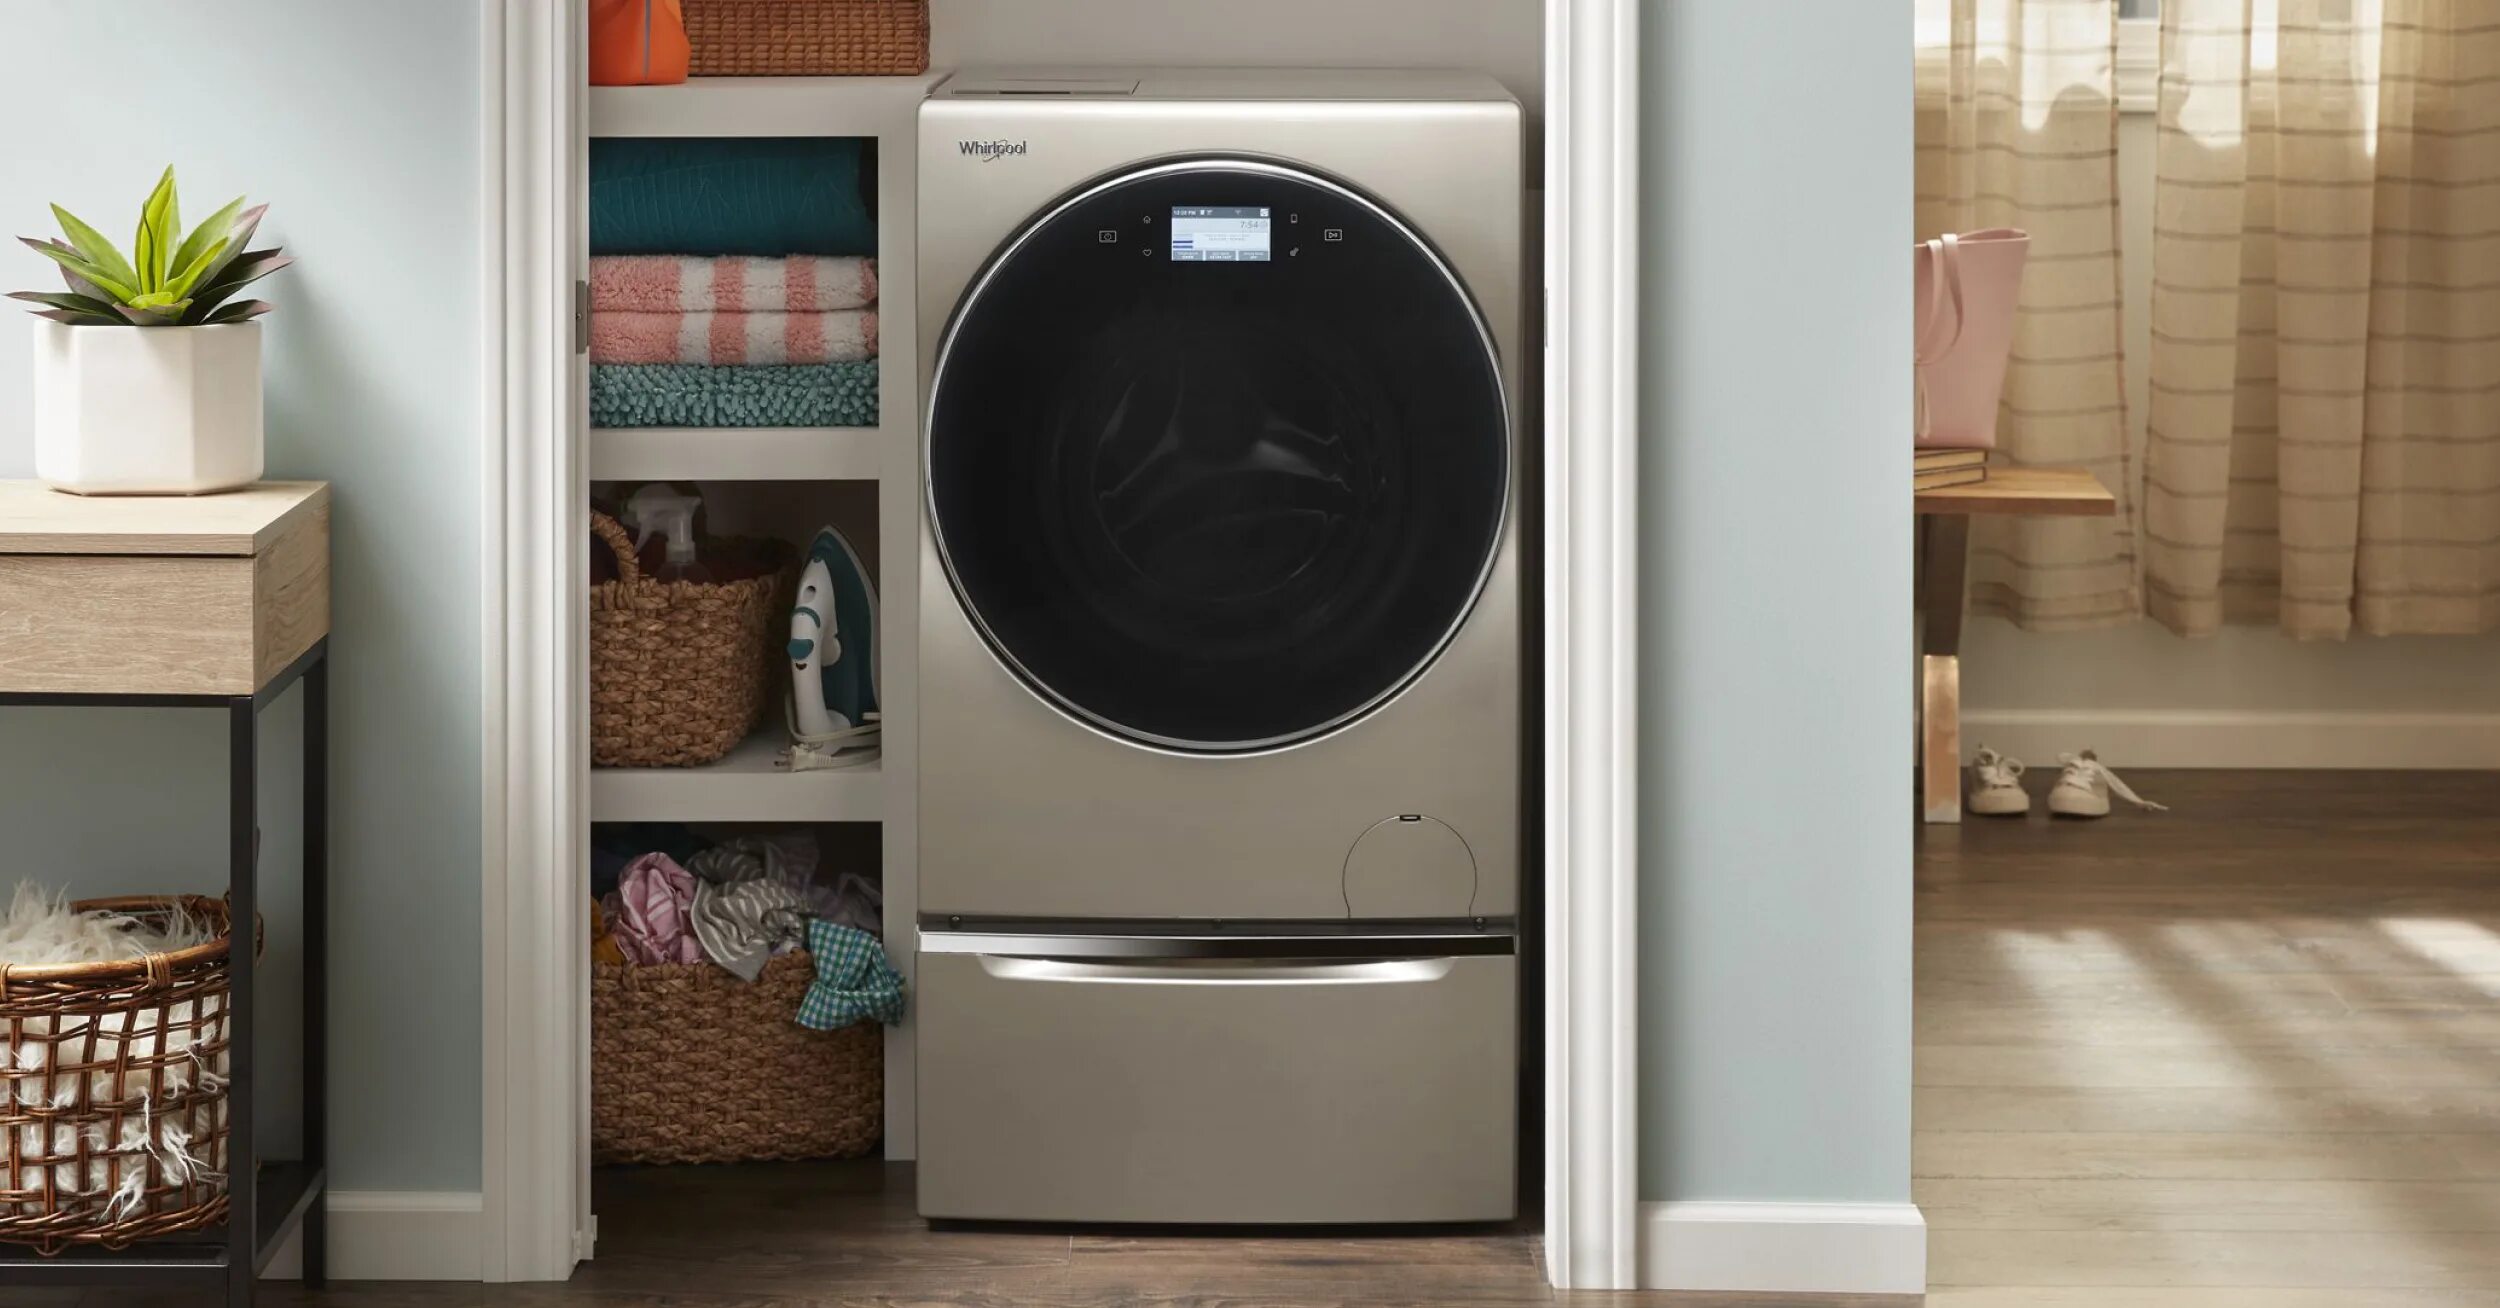 Whirlpool Ultimate Care 2 Dryer. Best Washer Dryer Combo. Whirlpool wpl3#. Whirlpool 533261.